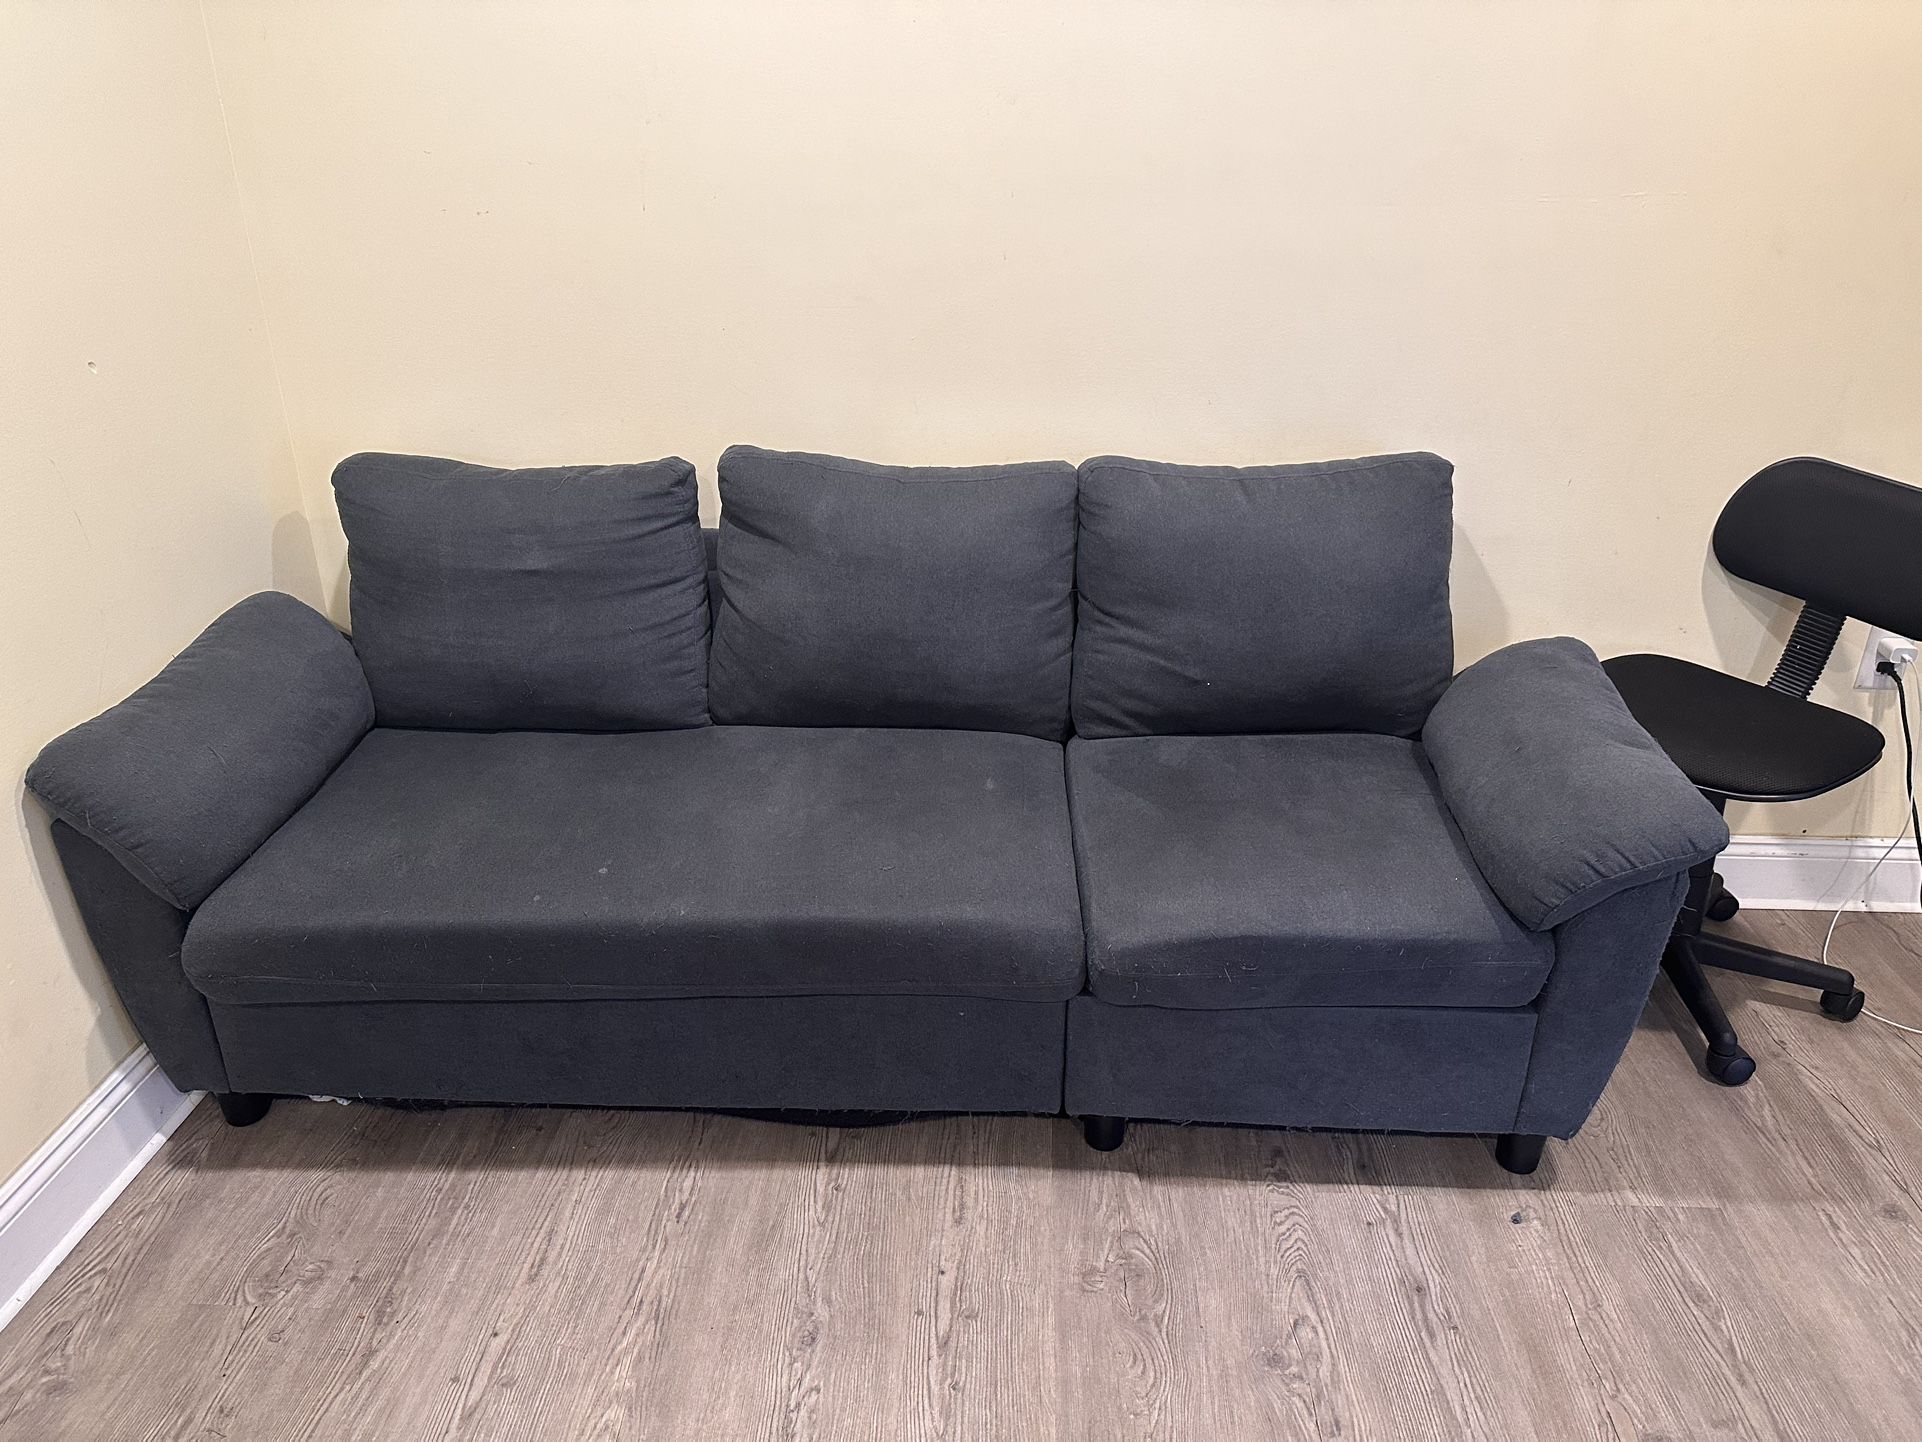 Couch Pick Up Only